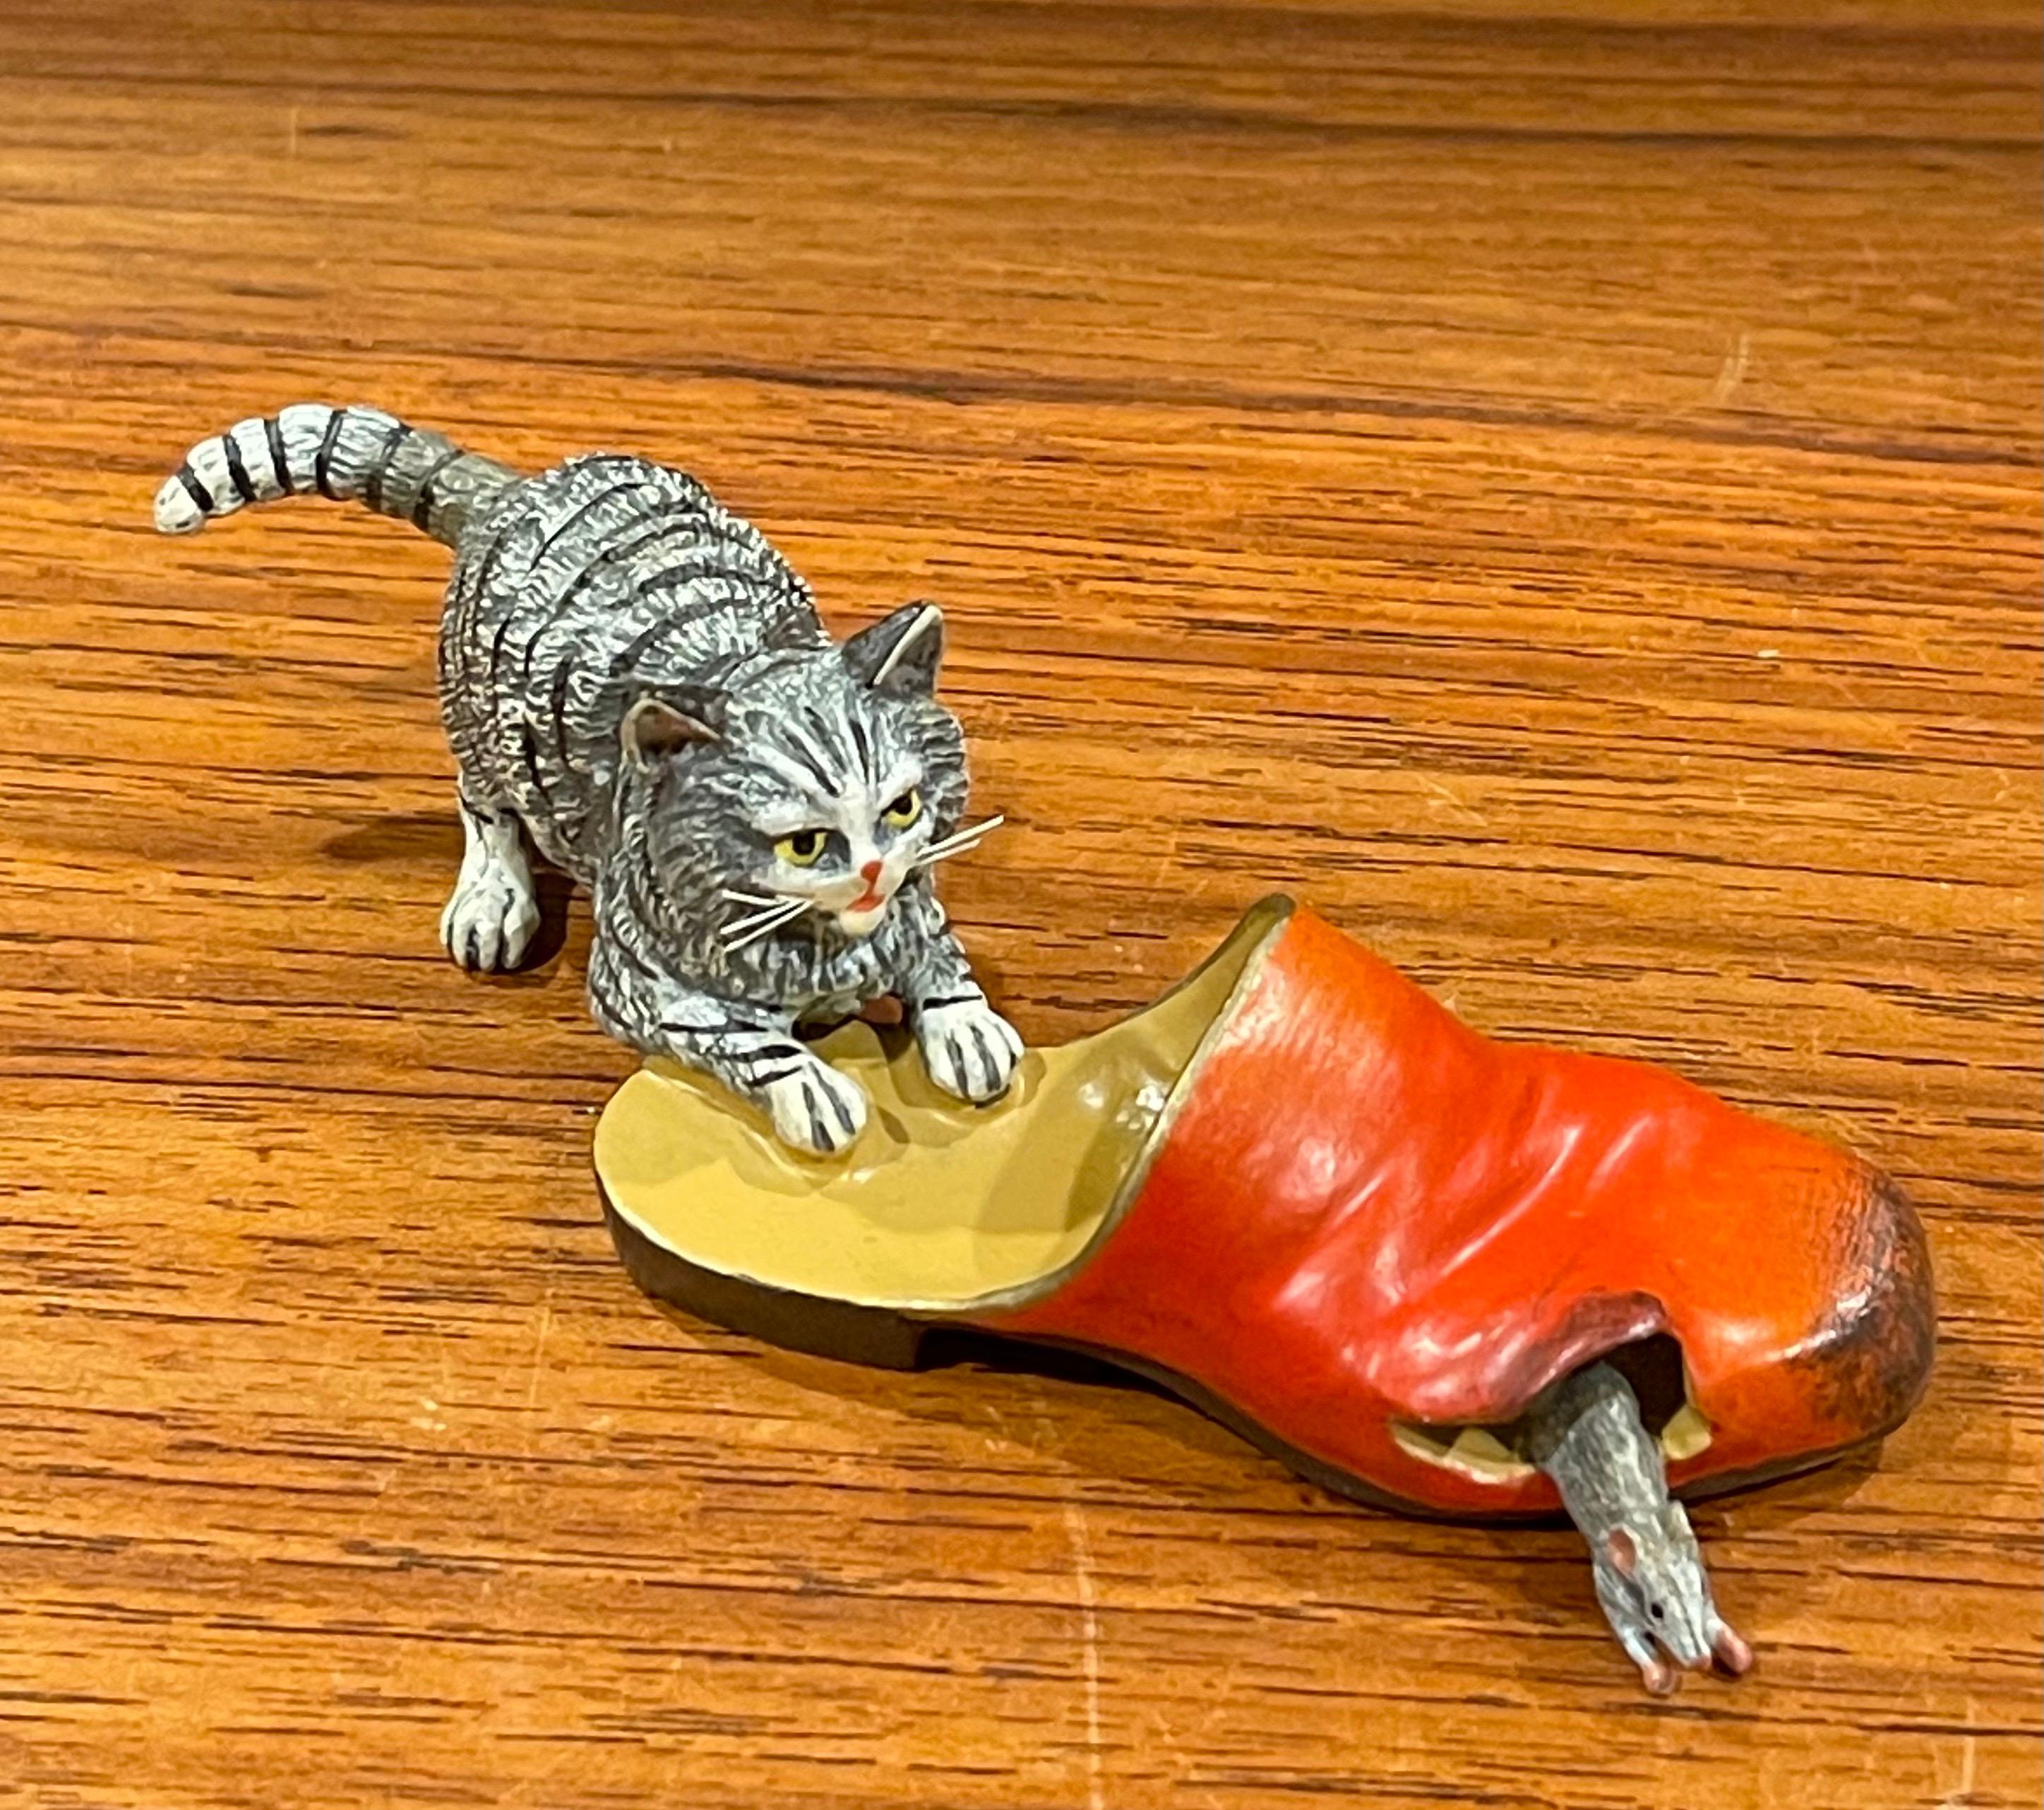 Austrian bronze hand painted miniature cat, mouse & shoe sculpture, circa 2000s. This piece has amazing detail and weight and is in excellent condition. The piece is individually cast from sand molds that are used only once, then sculpted and hand